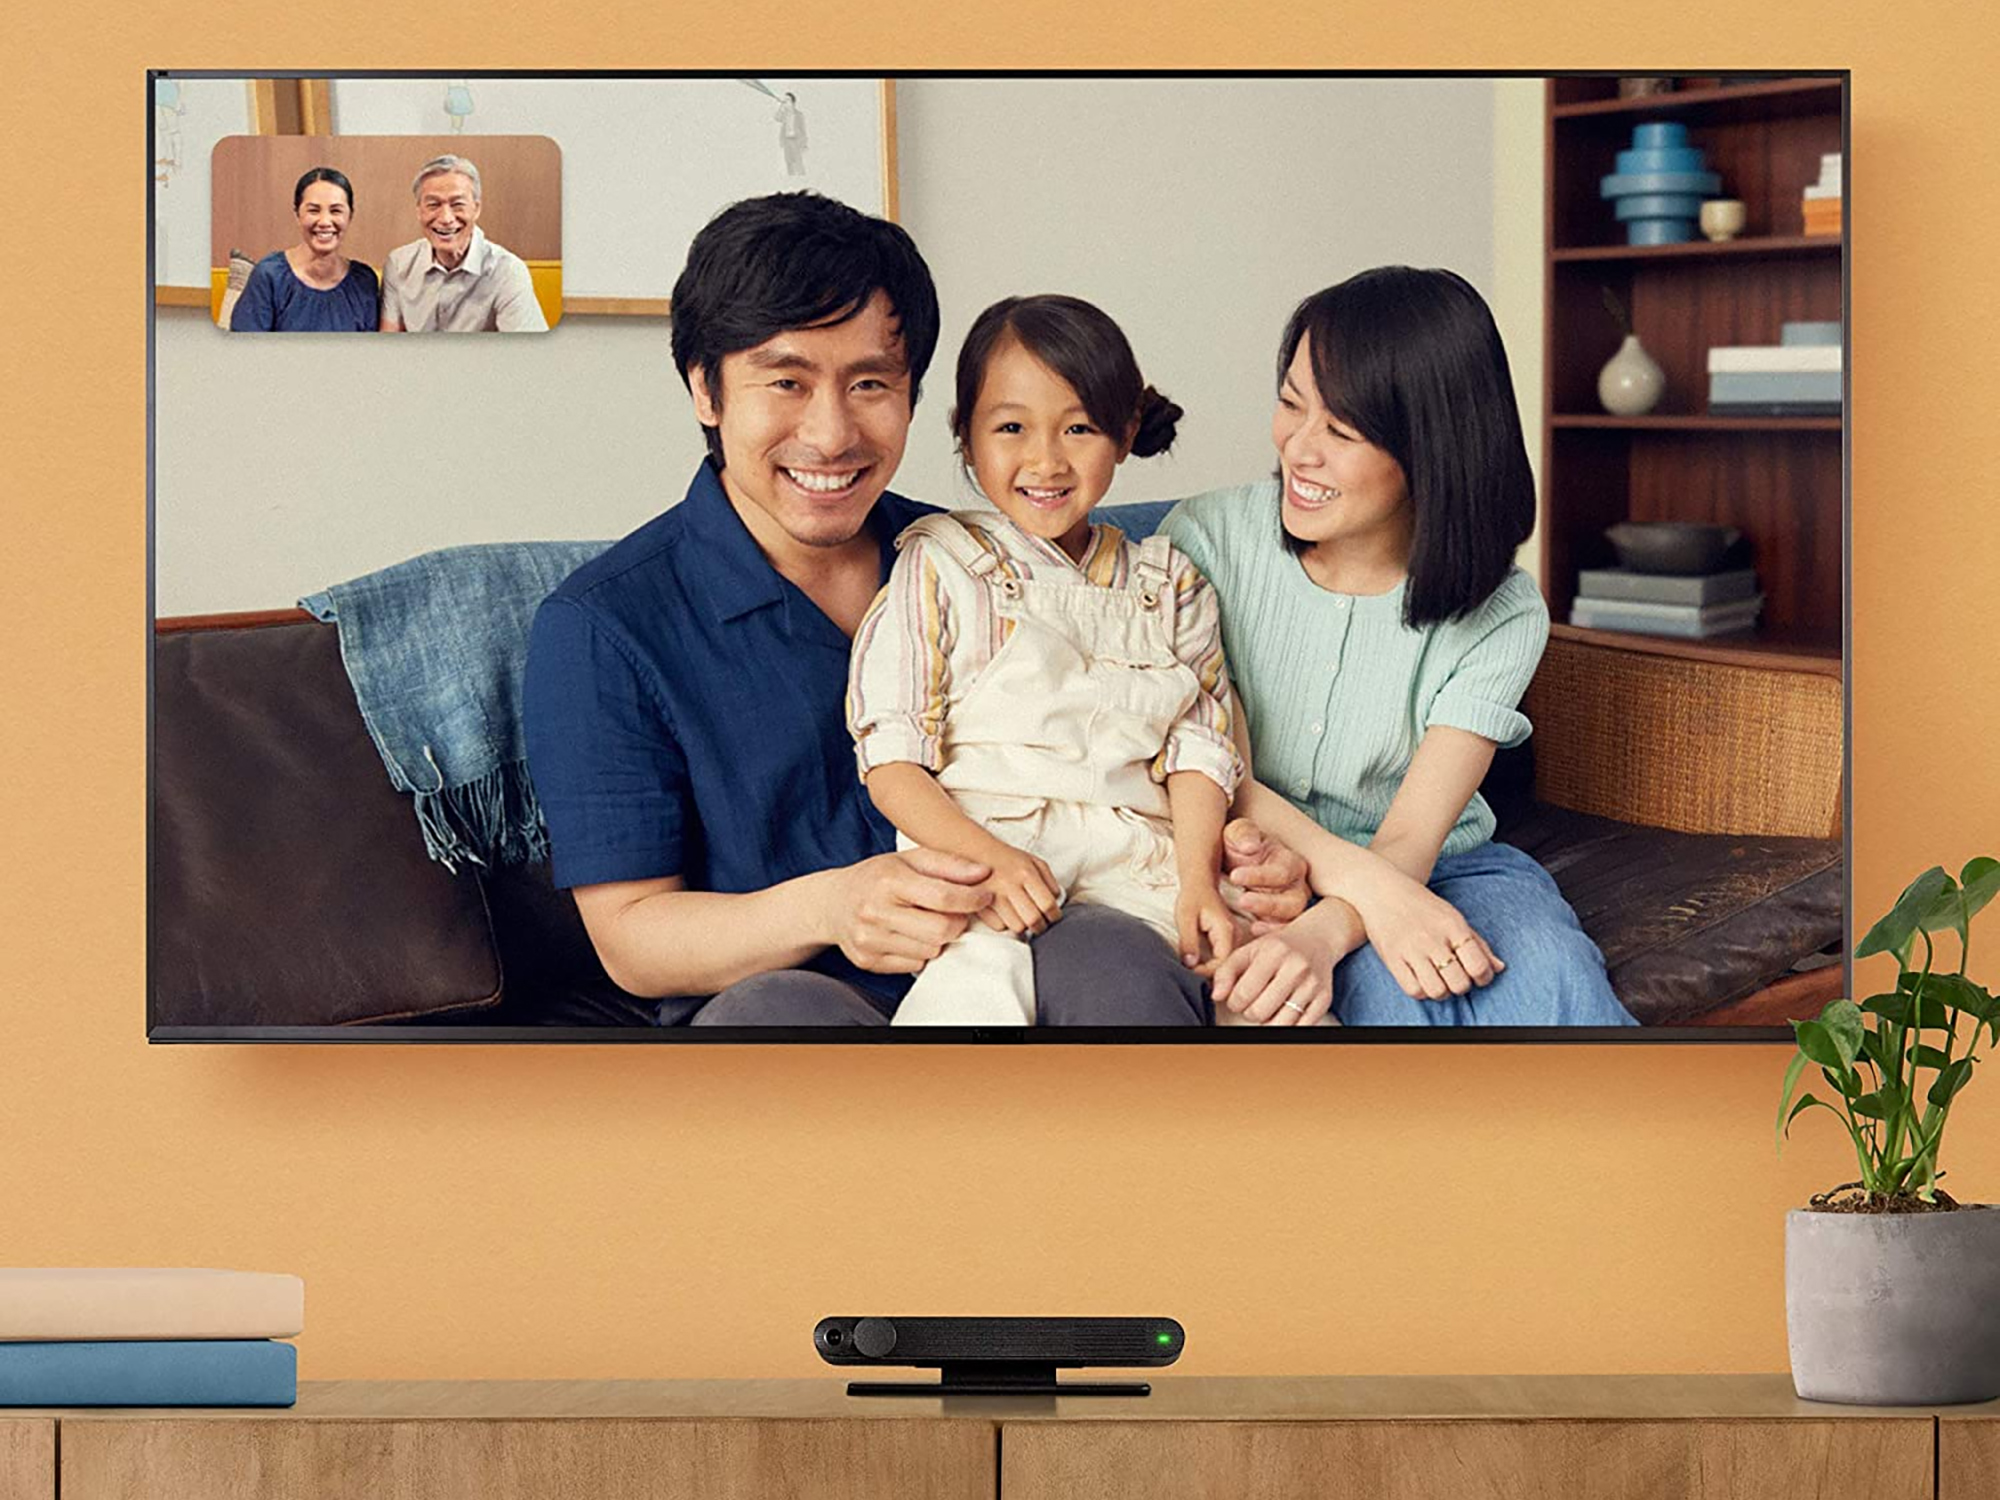 How to put video calls on your TV